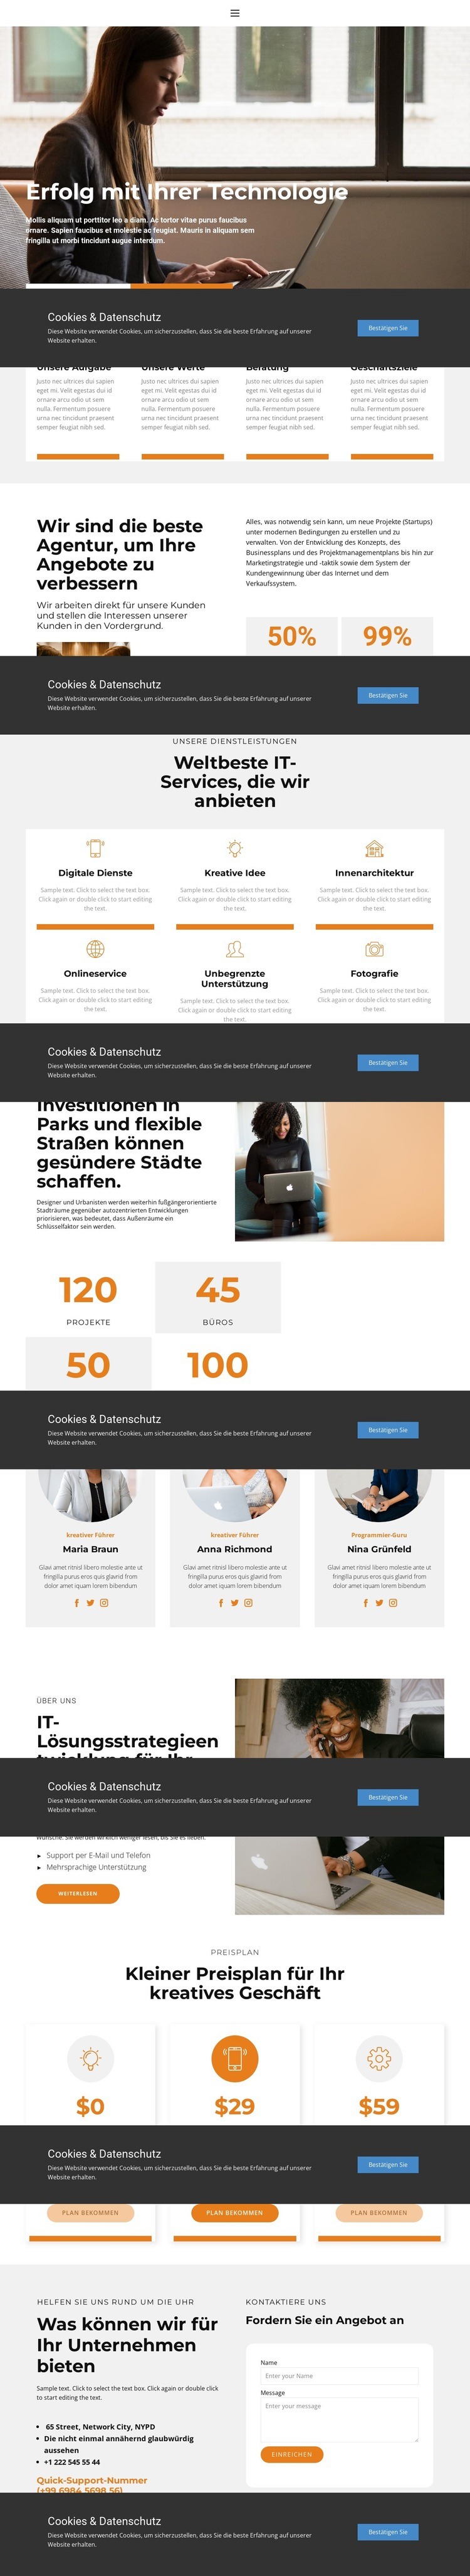 Was ist Erfolg Landing Page